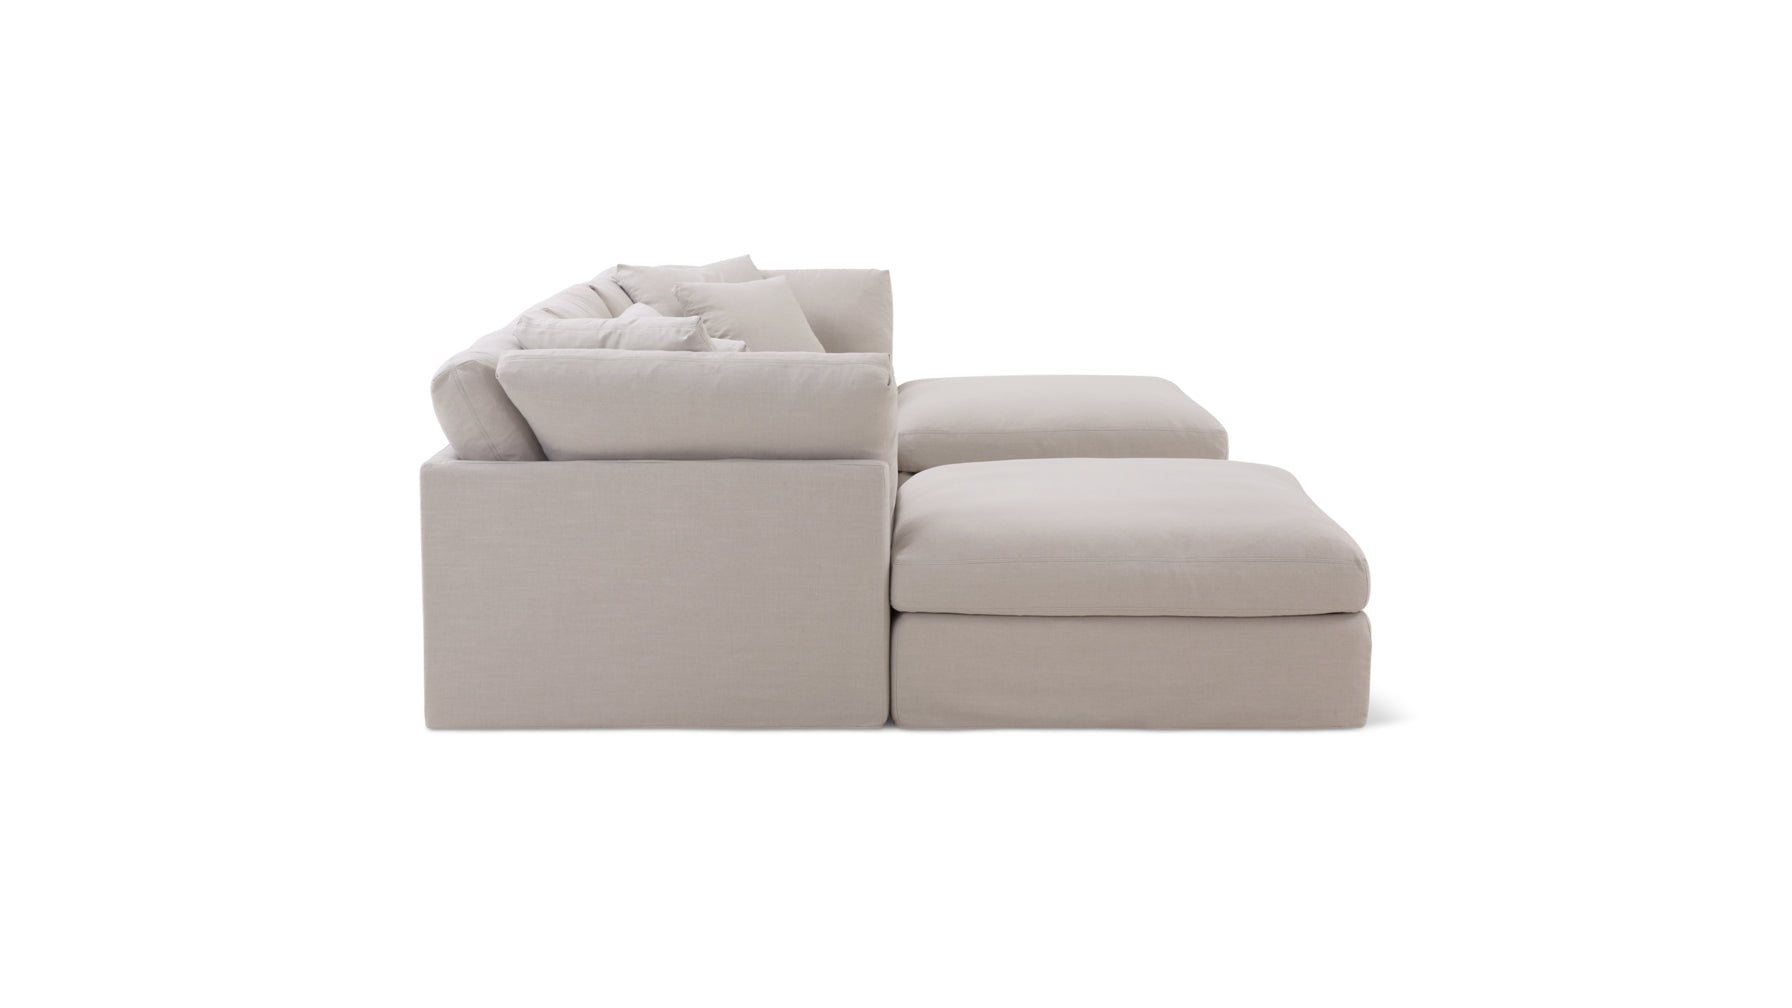 Get Together™ 5-Piece Modular U-Shaped Sectional, Large, Clay - Image 3